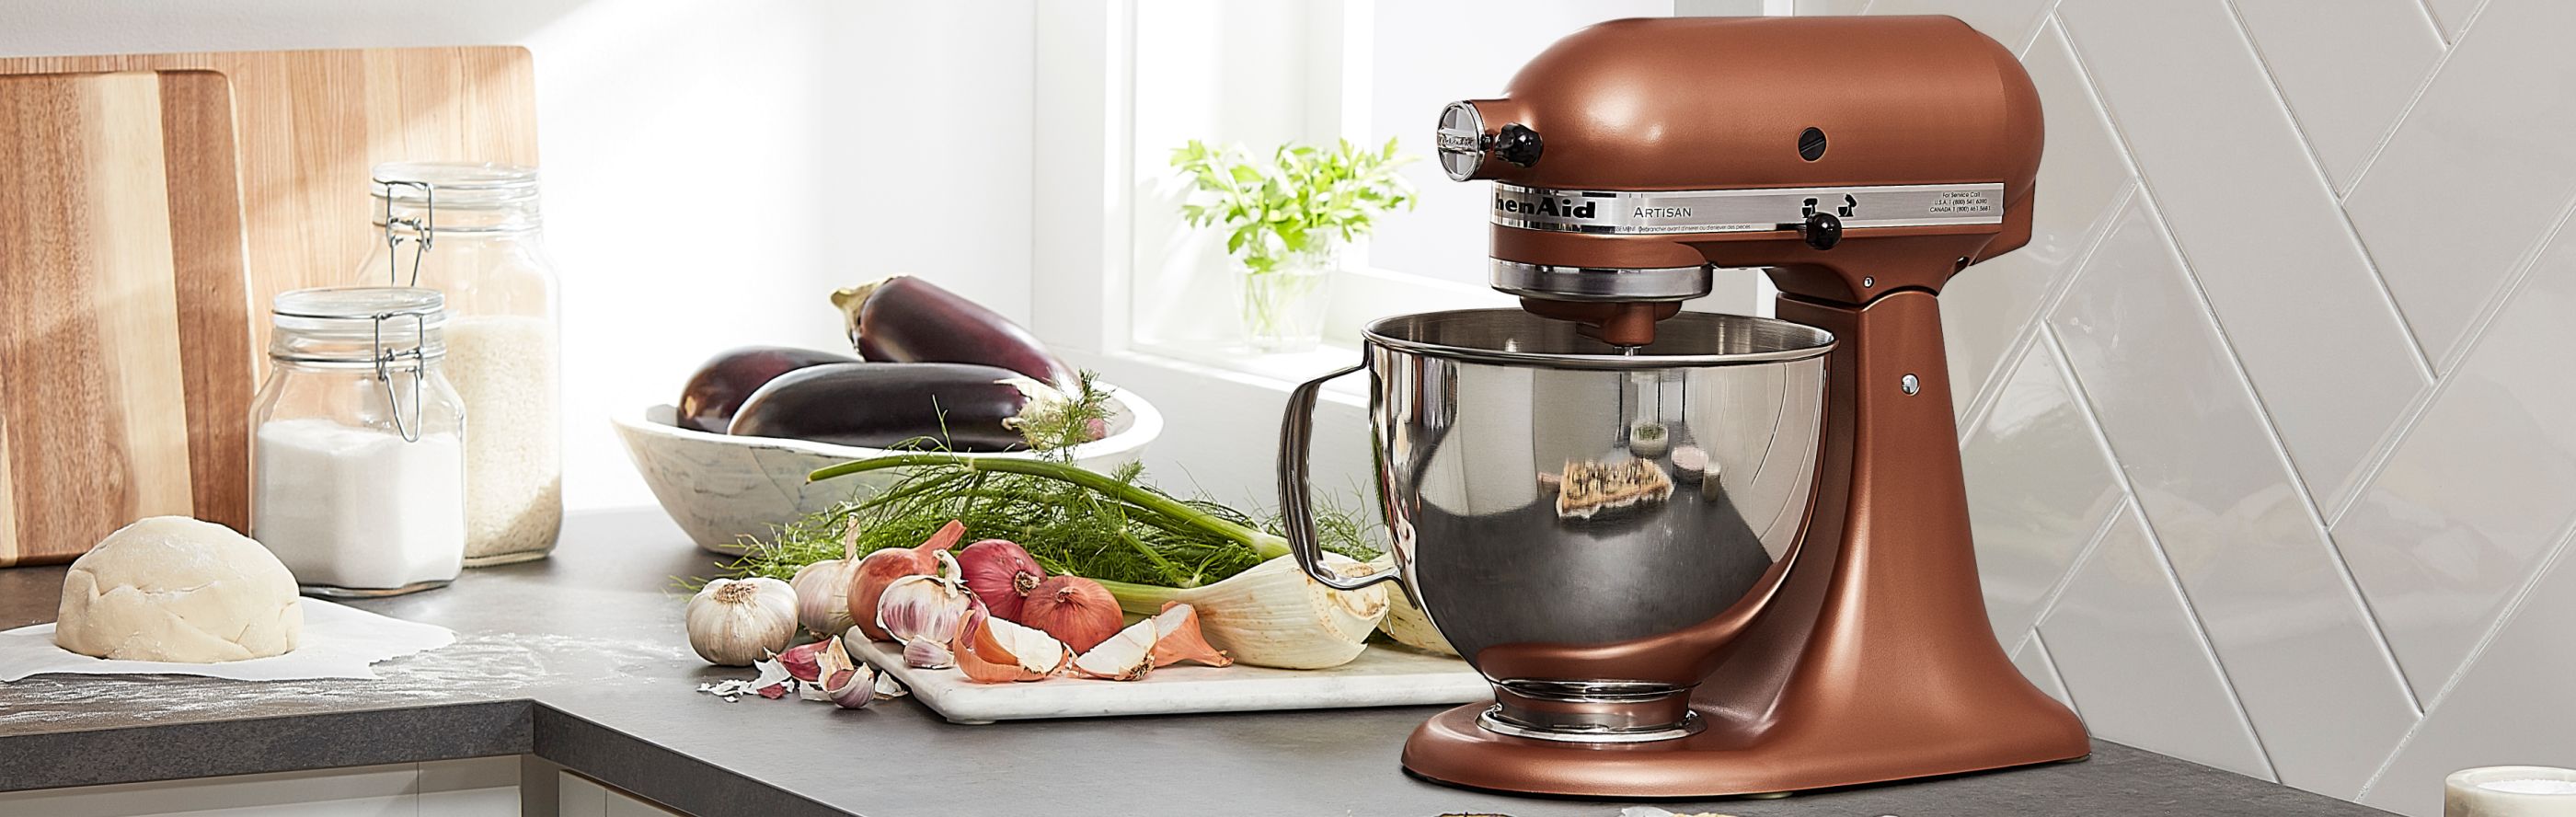 Copper KitchenAid® stand mixer next to vegetables on counter 